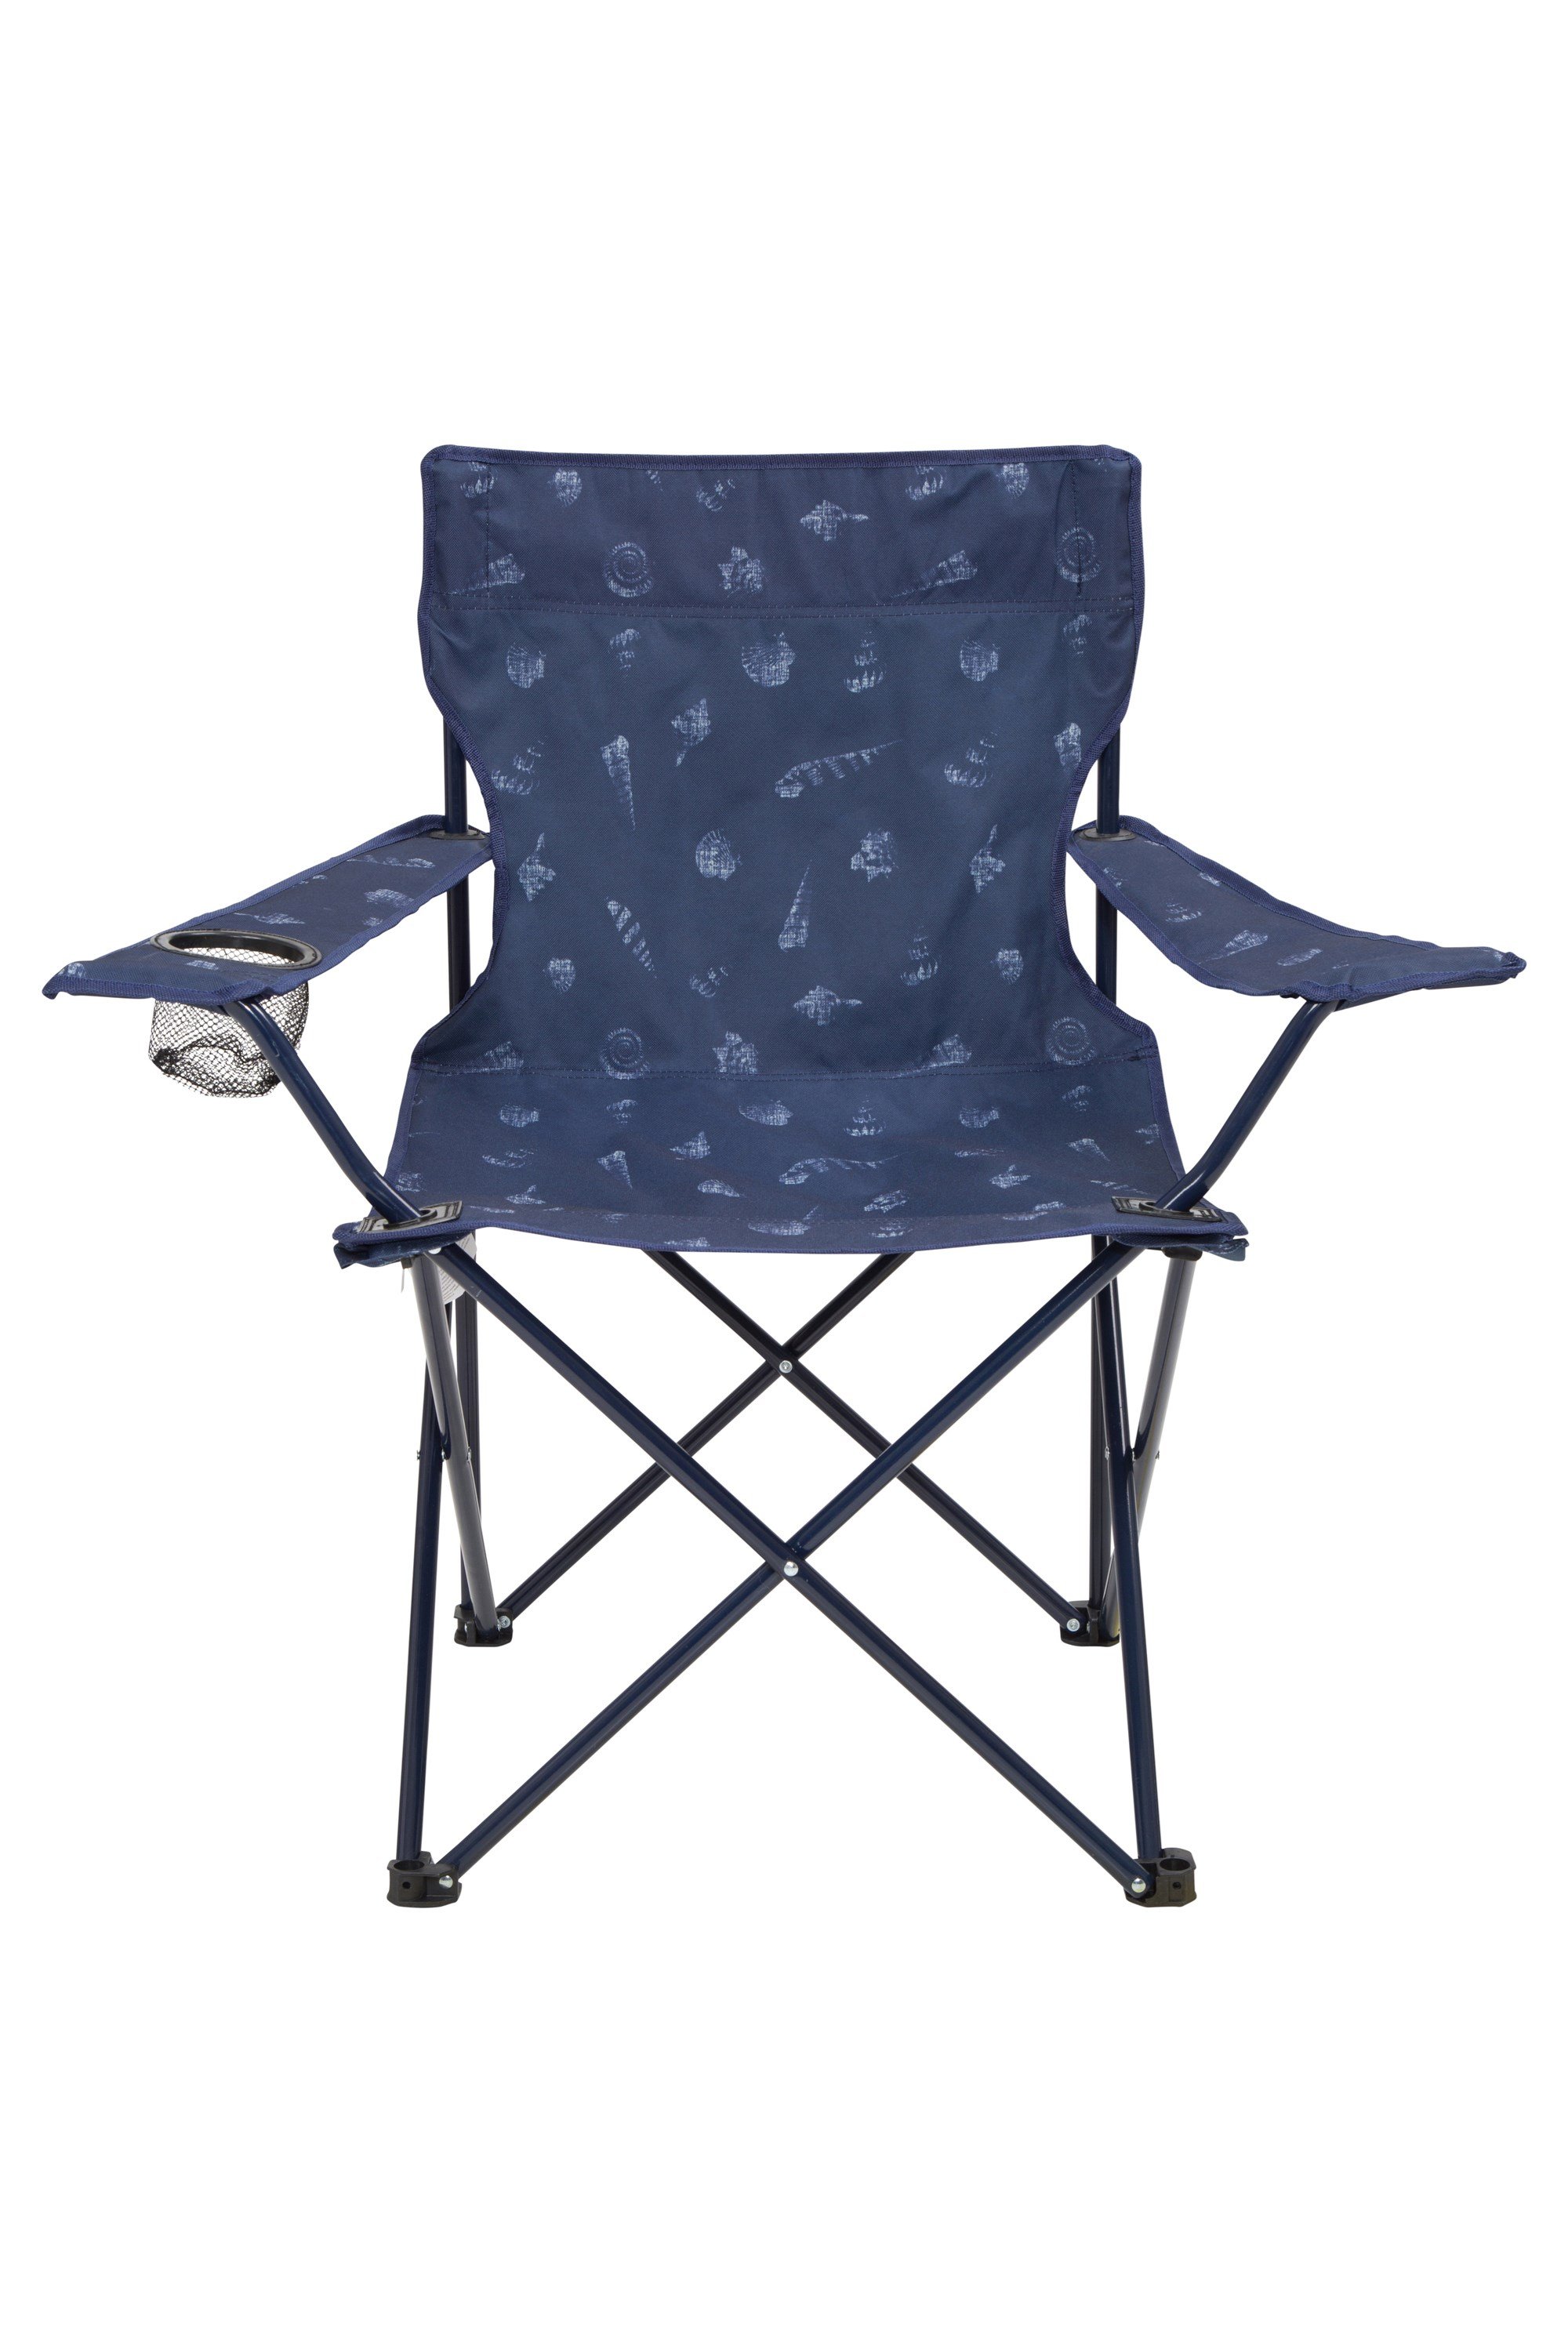 Cup Holder Camping Chair Mountain Warehouse Patterned Folding Chair